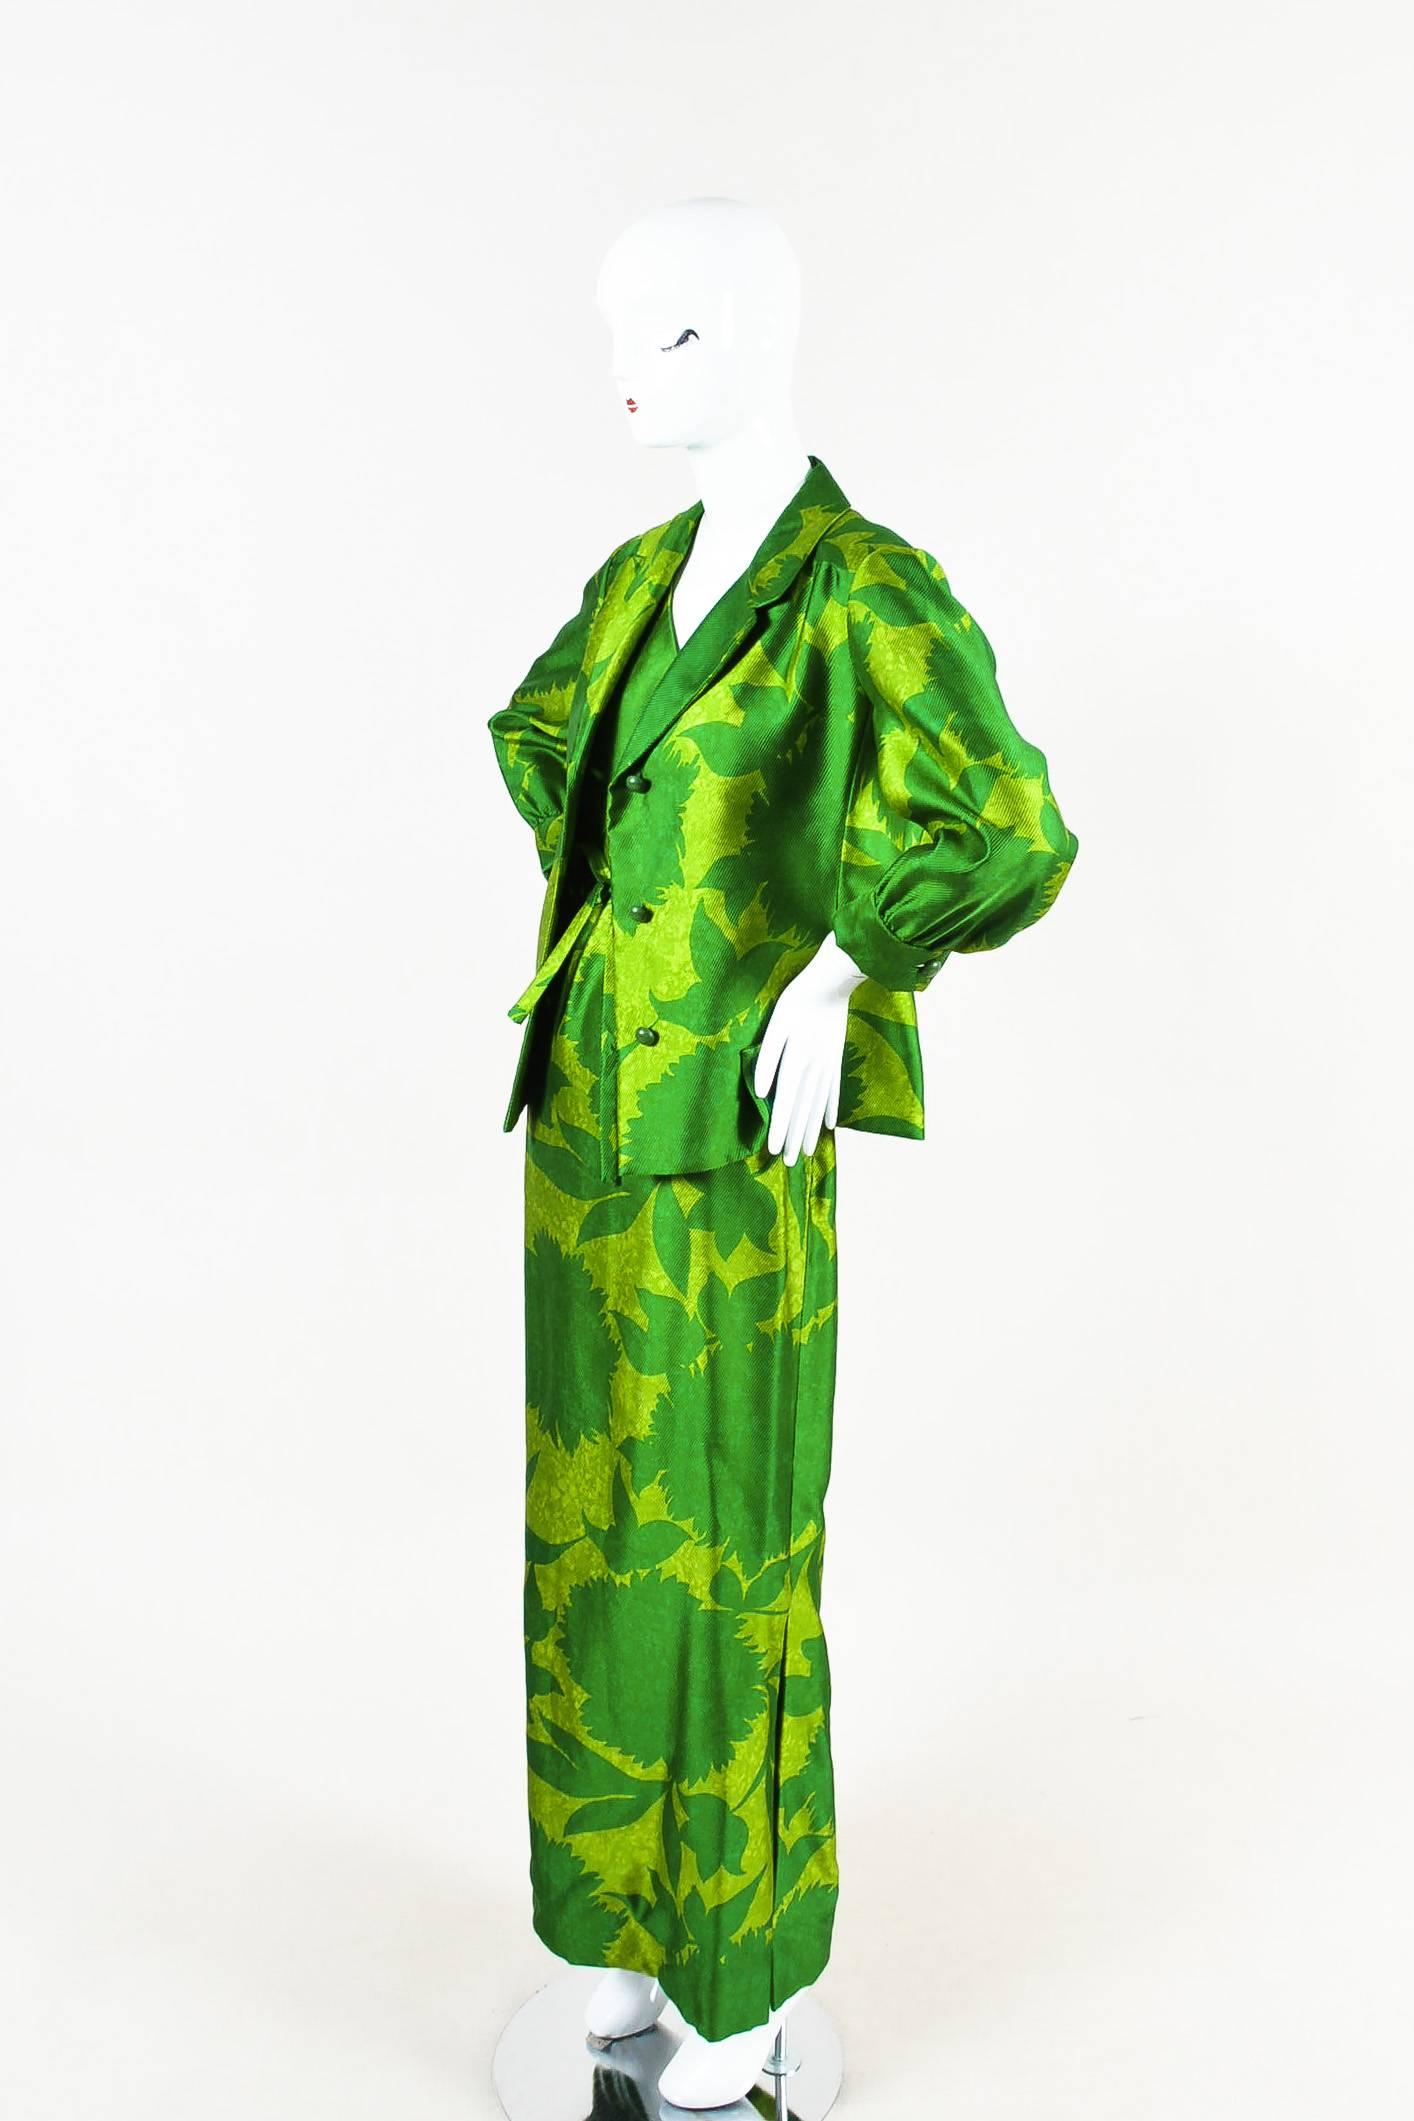 From Nina Ricci's "Mademoiselle Ricci" line, a demi-couture brand developed by the fashion house in the 1960s. Green floral printed jacket and dress set from Mademoiselle Ricci. Sleeveless maxi dress comes with an adjustable tie belt. Slit